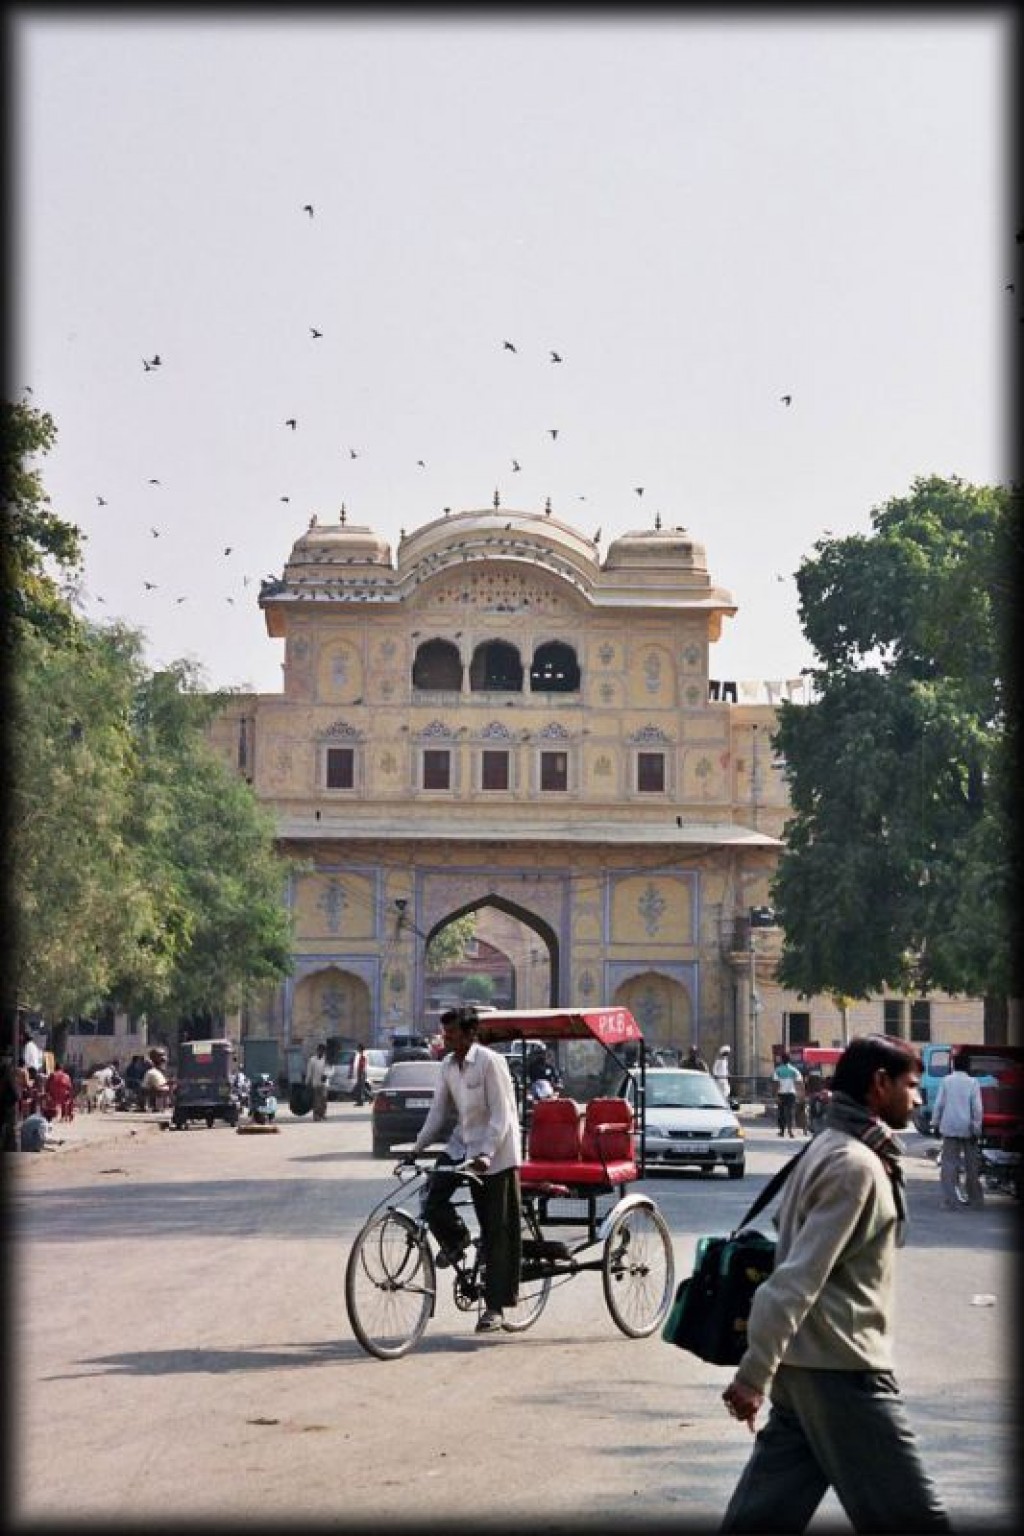 The Jaipur City Palace is an elaborate complex in the middle of the city.